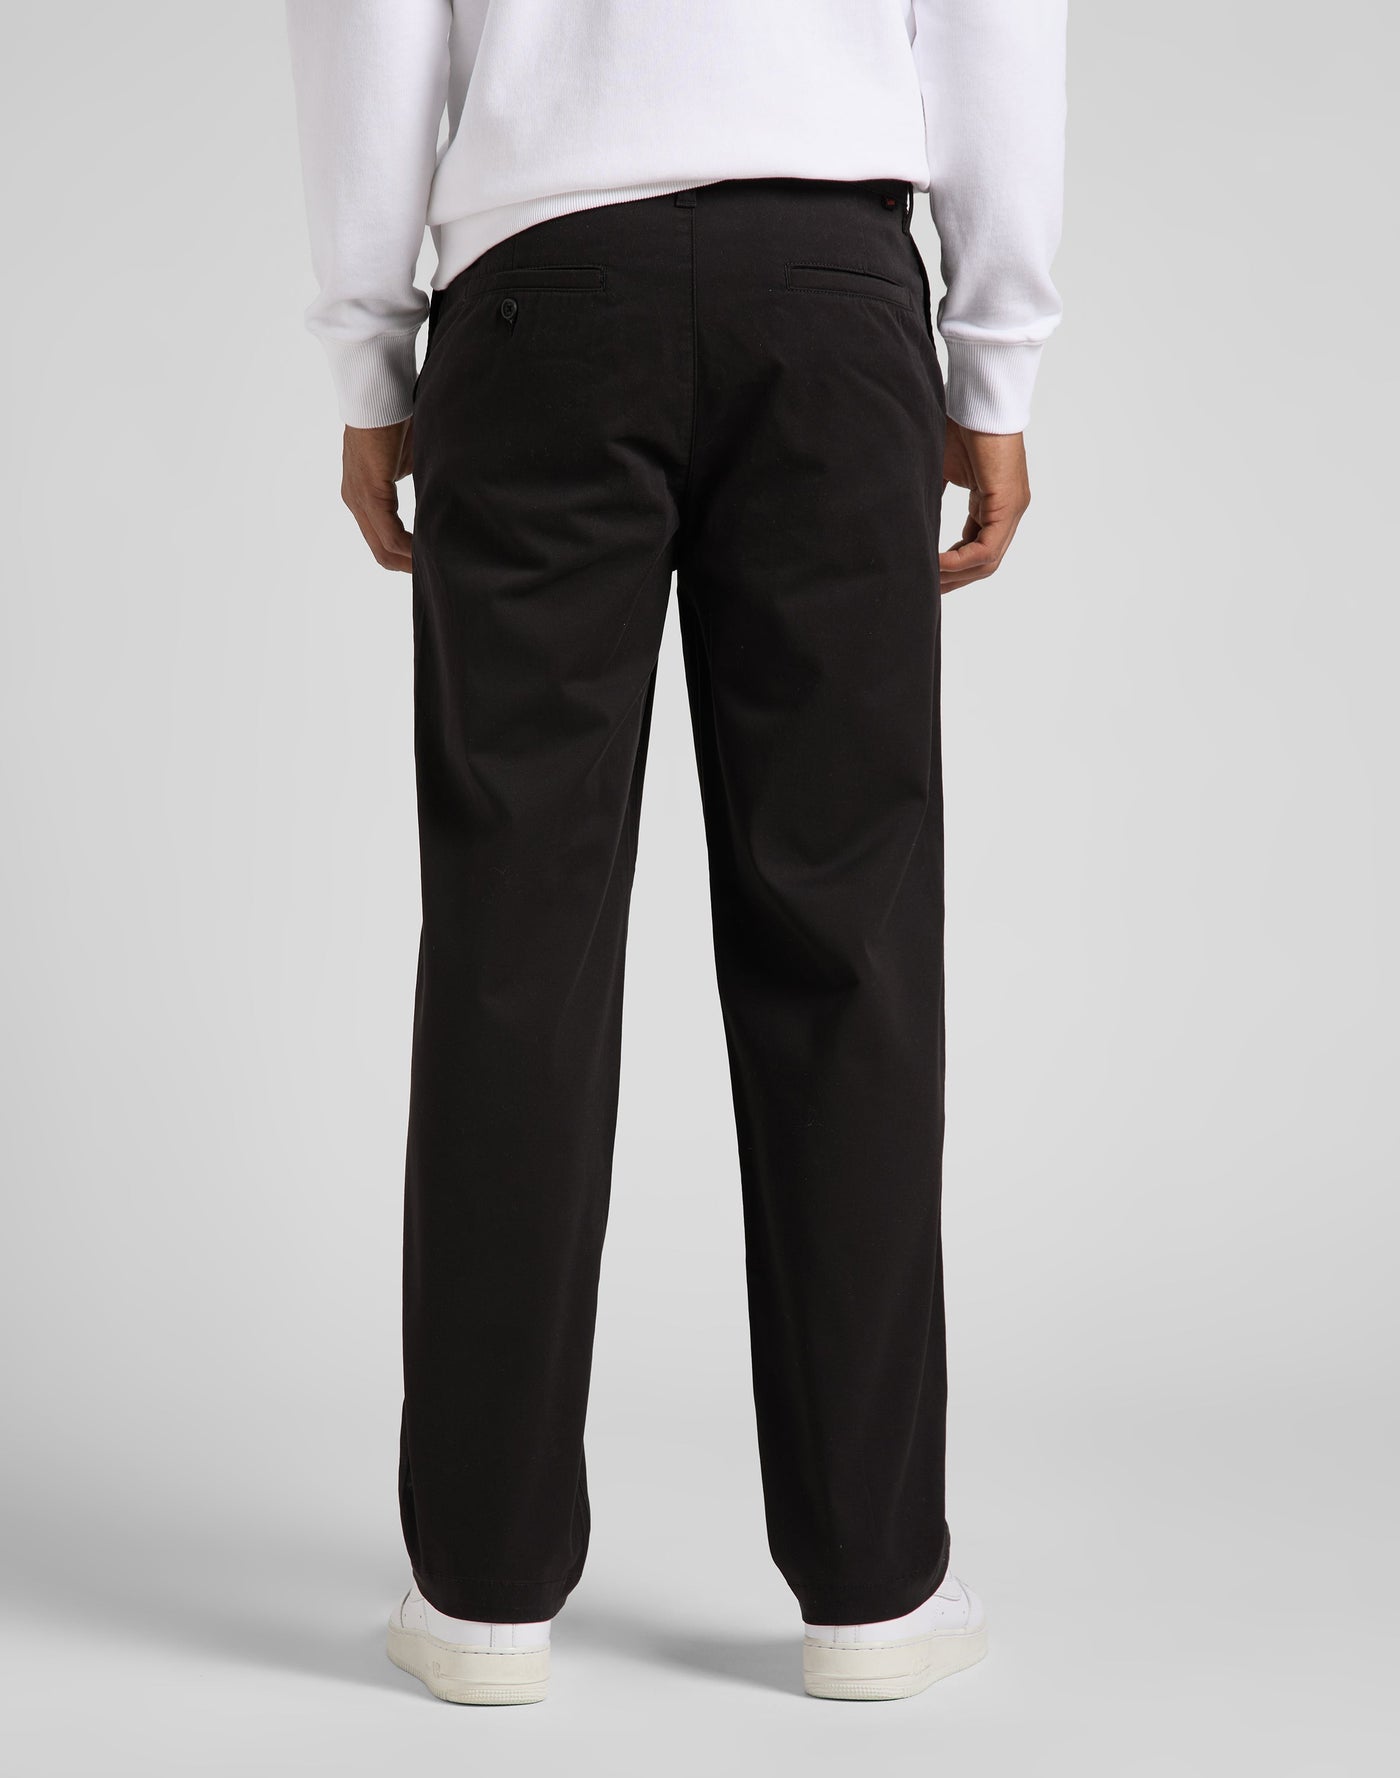 Relaxed Chino in Black Chinos Lee   